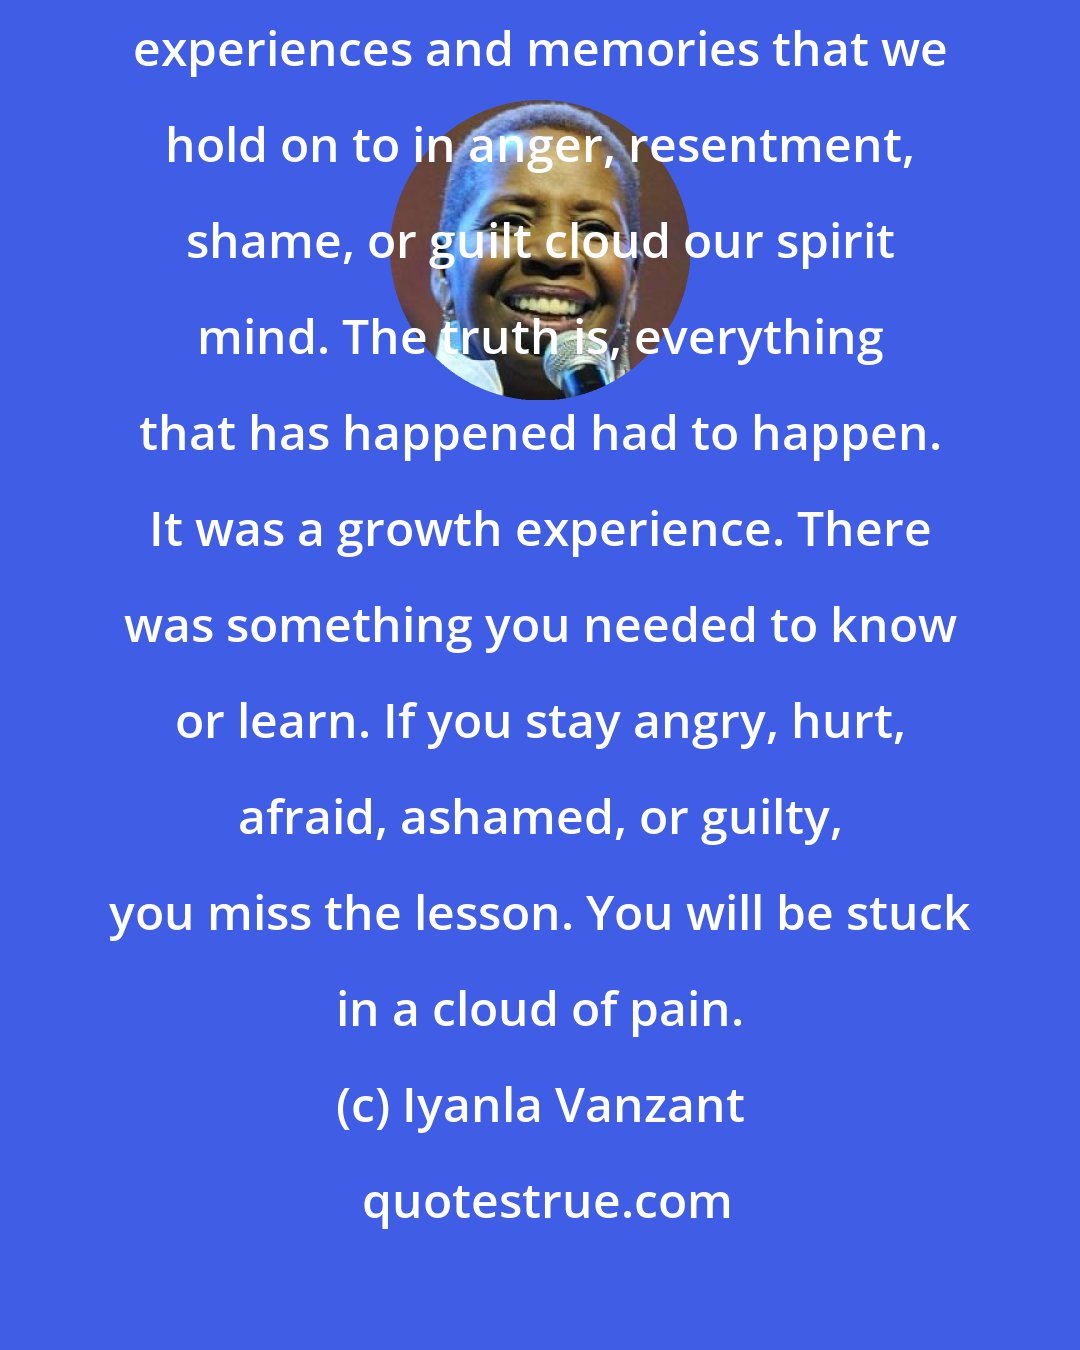 Iyanla Vanzant: Forgiveness is a process of giving up the old for something new. Old experiences and memories that we hold on to in anger, resentment, shame, or guilt cloud our spirit mind. The truth is, everything that has happened had to happen. It was a growth experience. There was something you needed to know or learn. If you stay angry, hurt, afraid, ashamed, or guilty, you miss the lesson. You will be stuck in a cloud of pain.